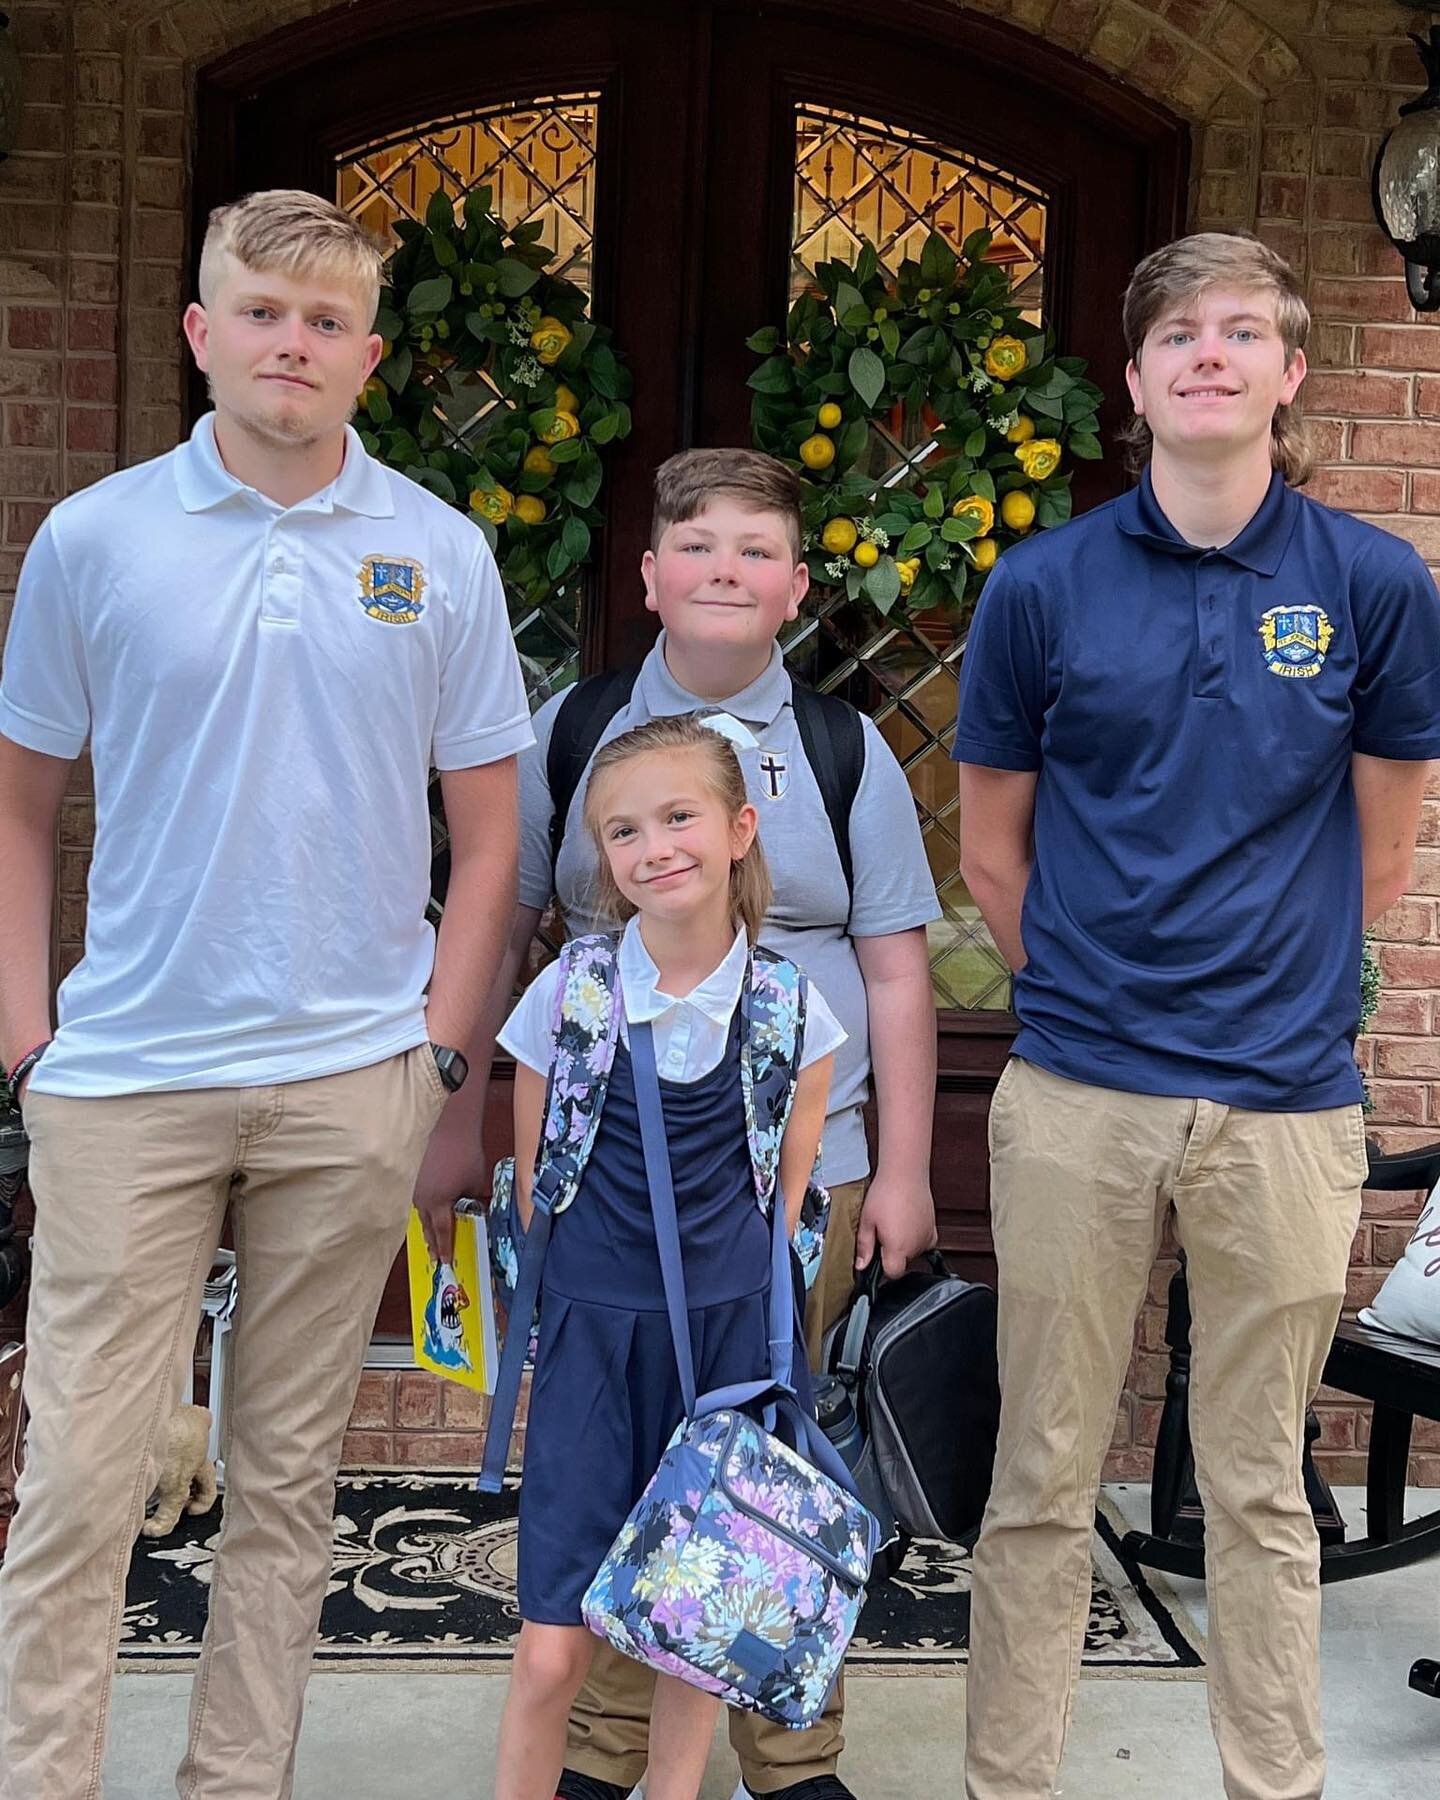 Joshua 1:9 NLT &ldquo;Be strong and courageous! Do not be afraid or discouraged. For the Lord your God is with you wherever you go.&rdquo;

Our children started school today and we have a senior, sophomore, 7th grader and 3rd grader! Praying for a bl